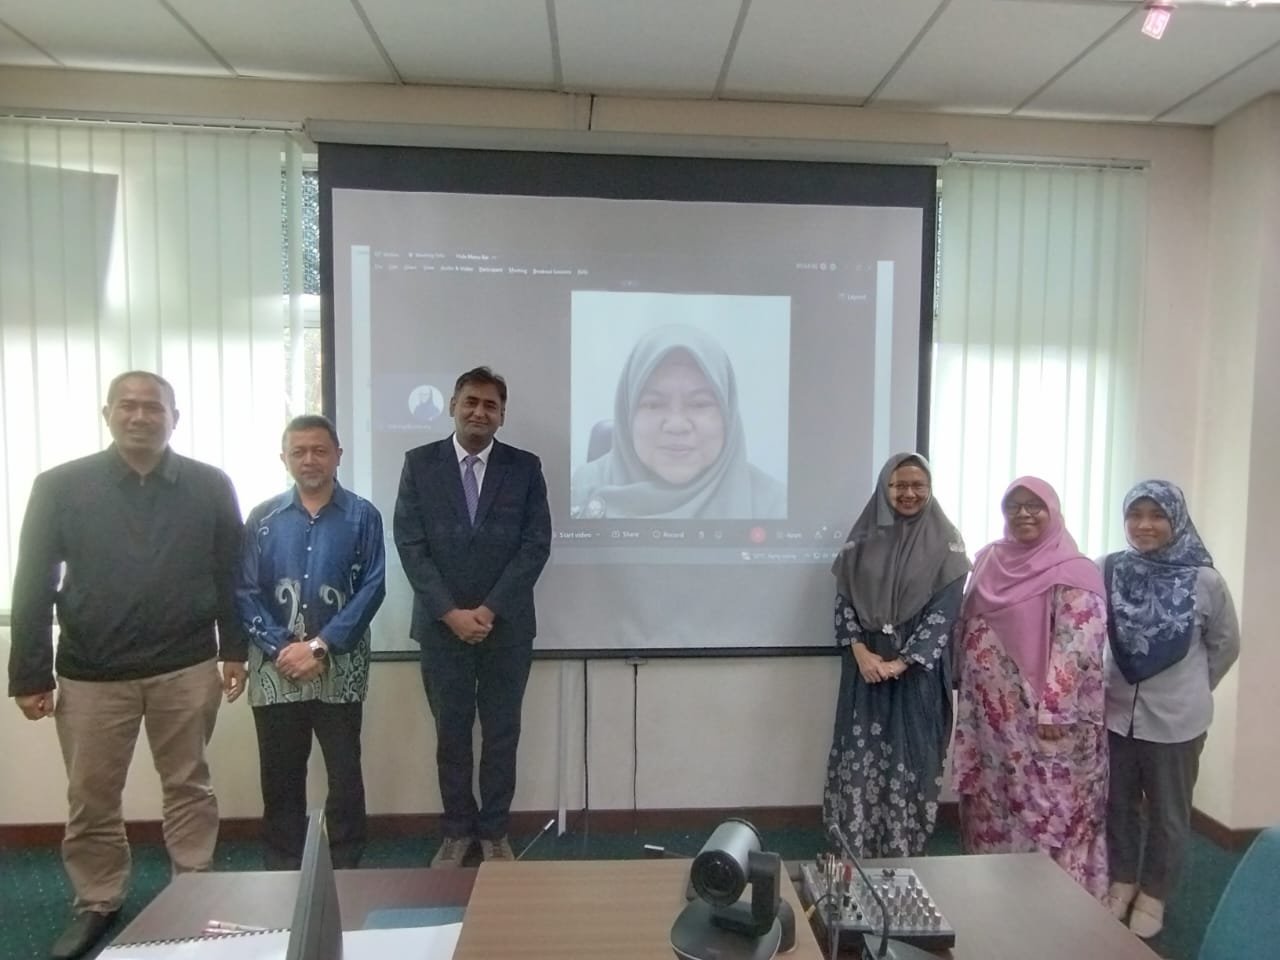 Dr. Israr Ghani Successfully Defends his Ph.D. Viva, Demonstrating Expertise in Software Engineering